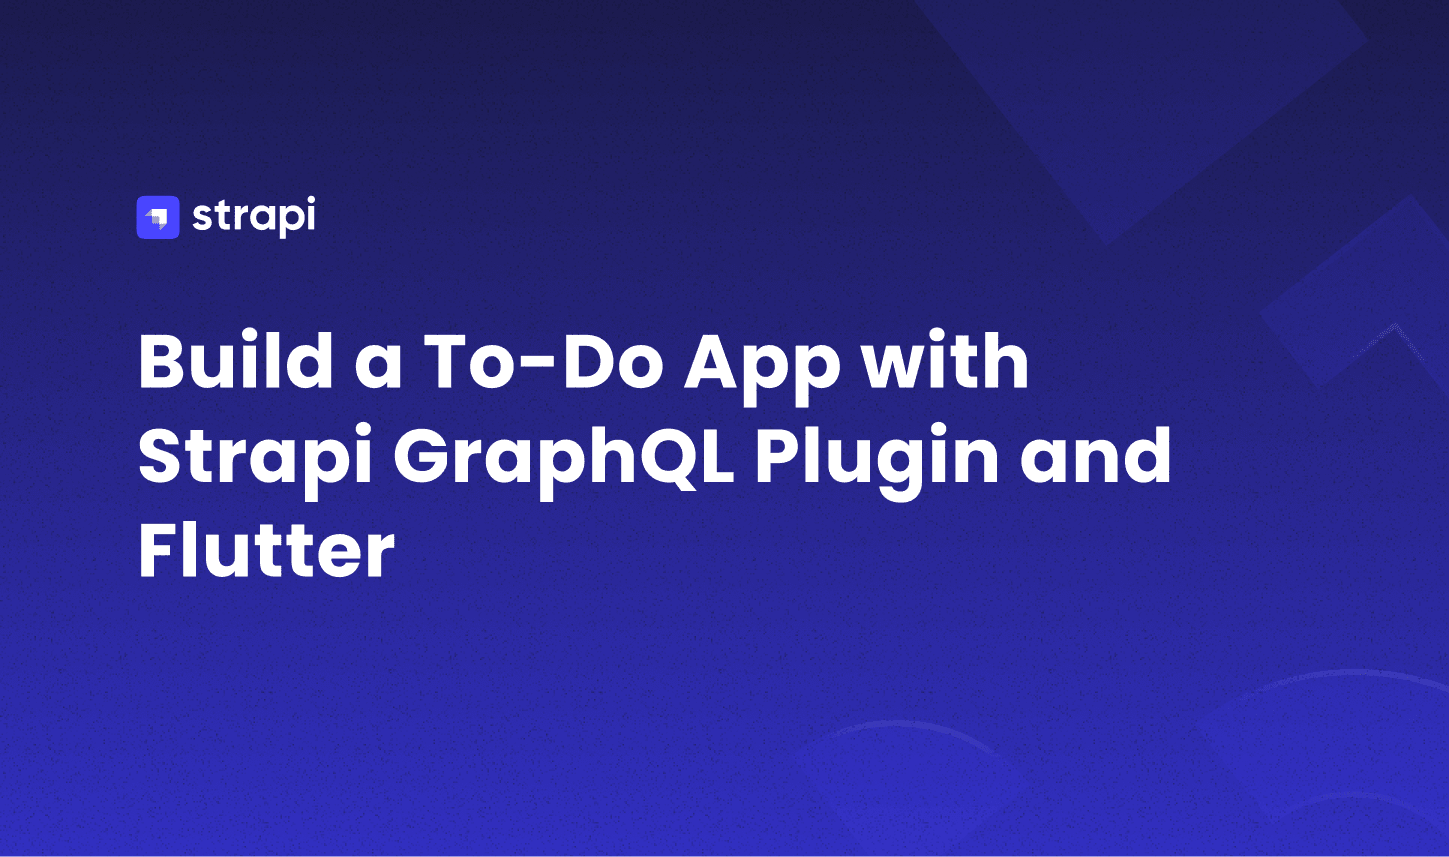 How To Build A To-Do App With Strapi Graphql Plugin And Flutter